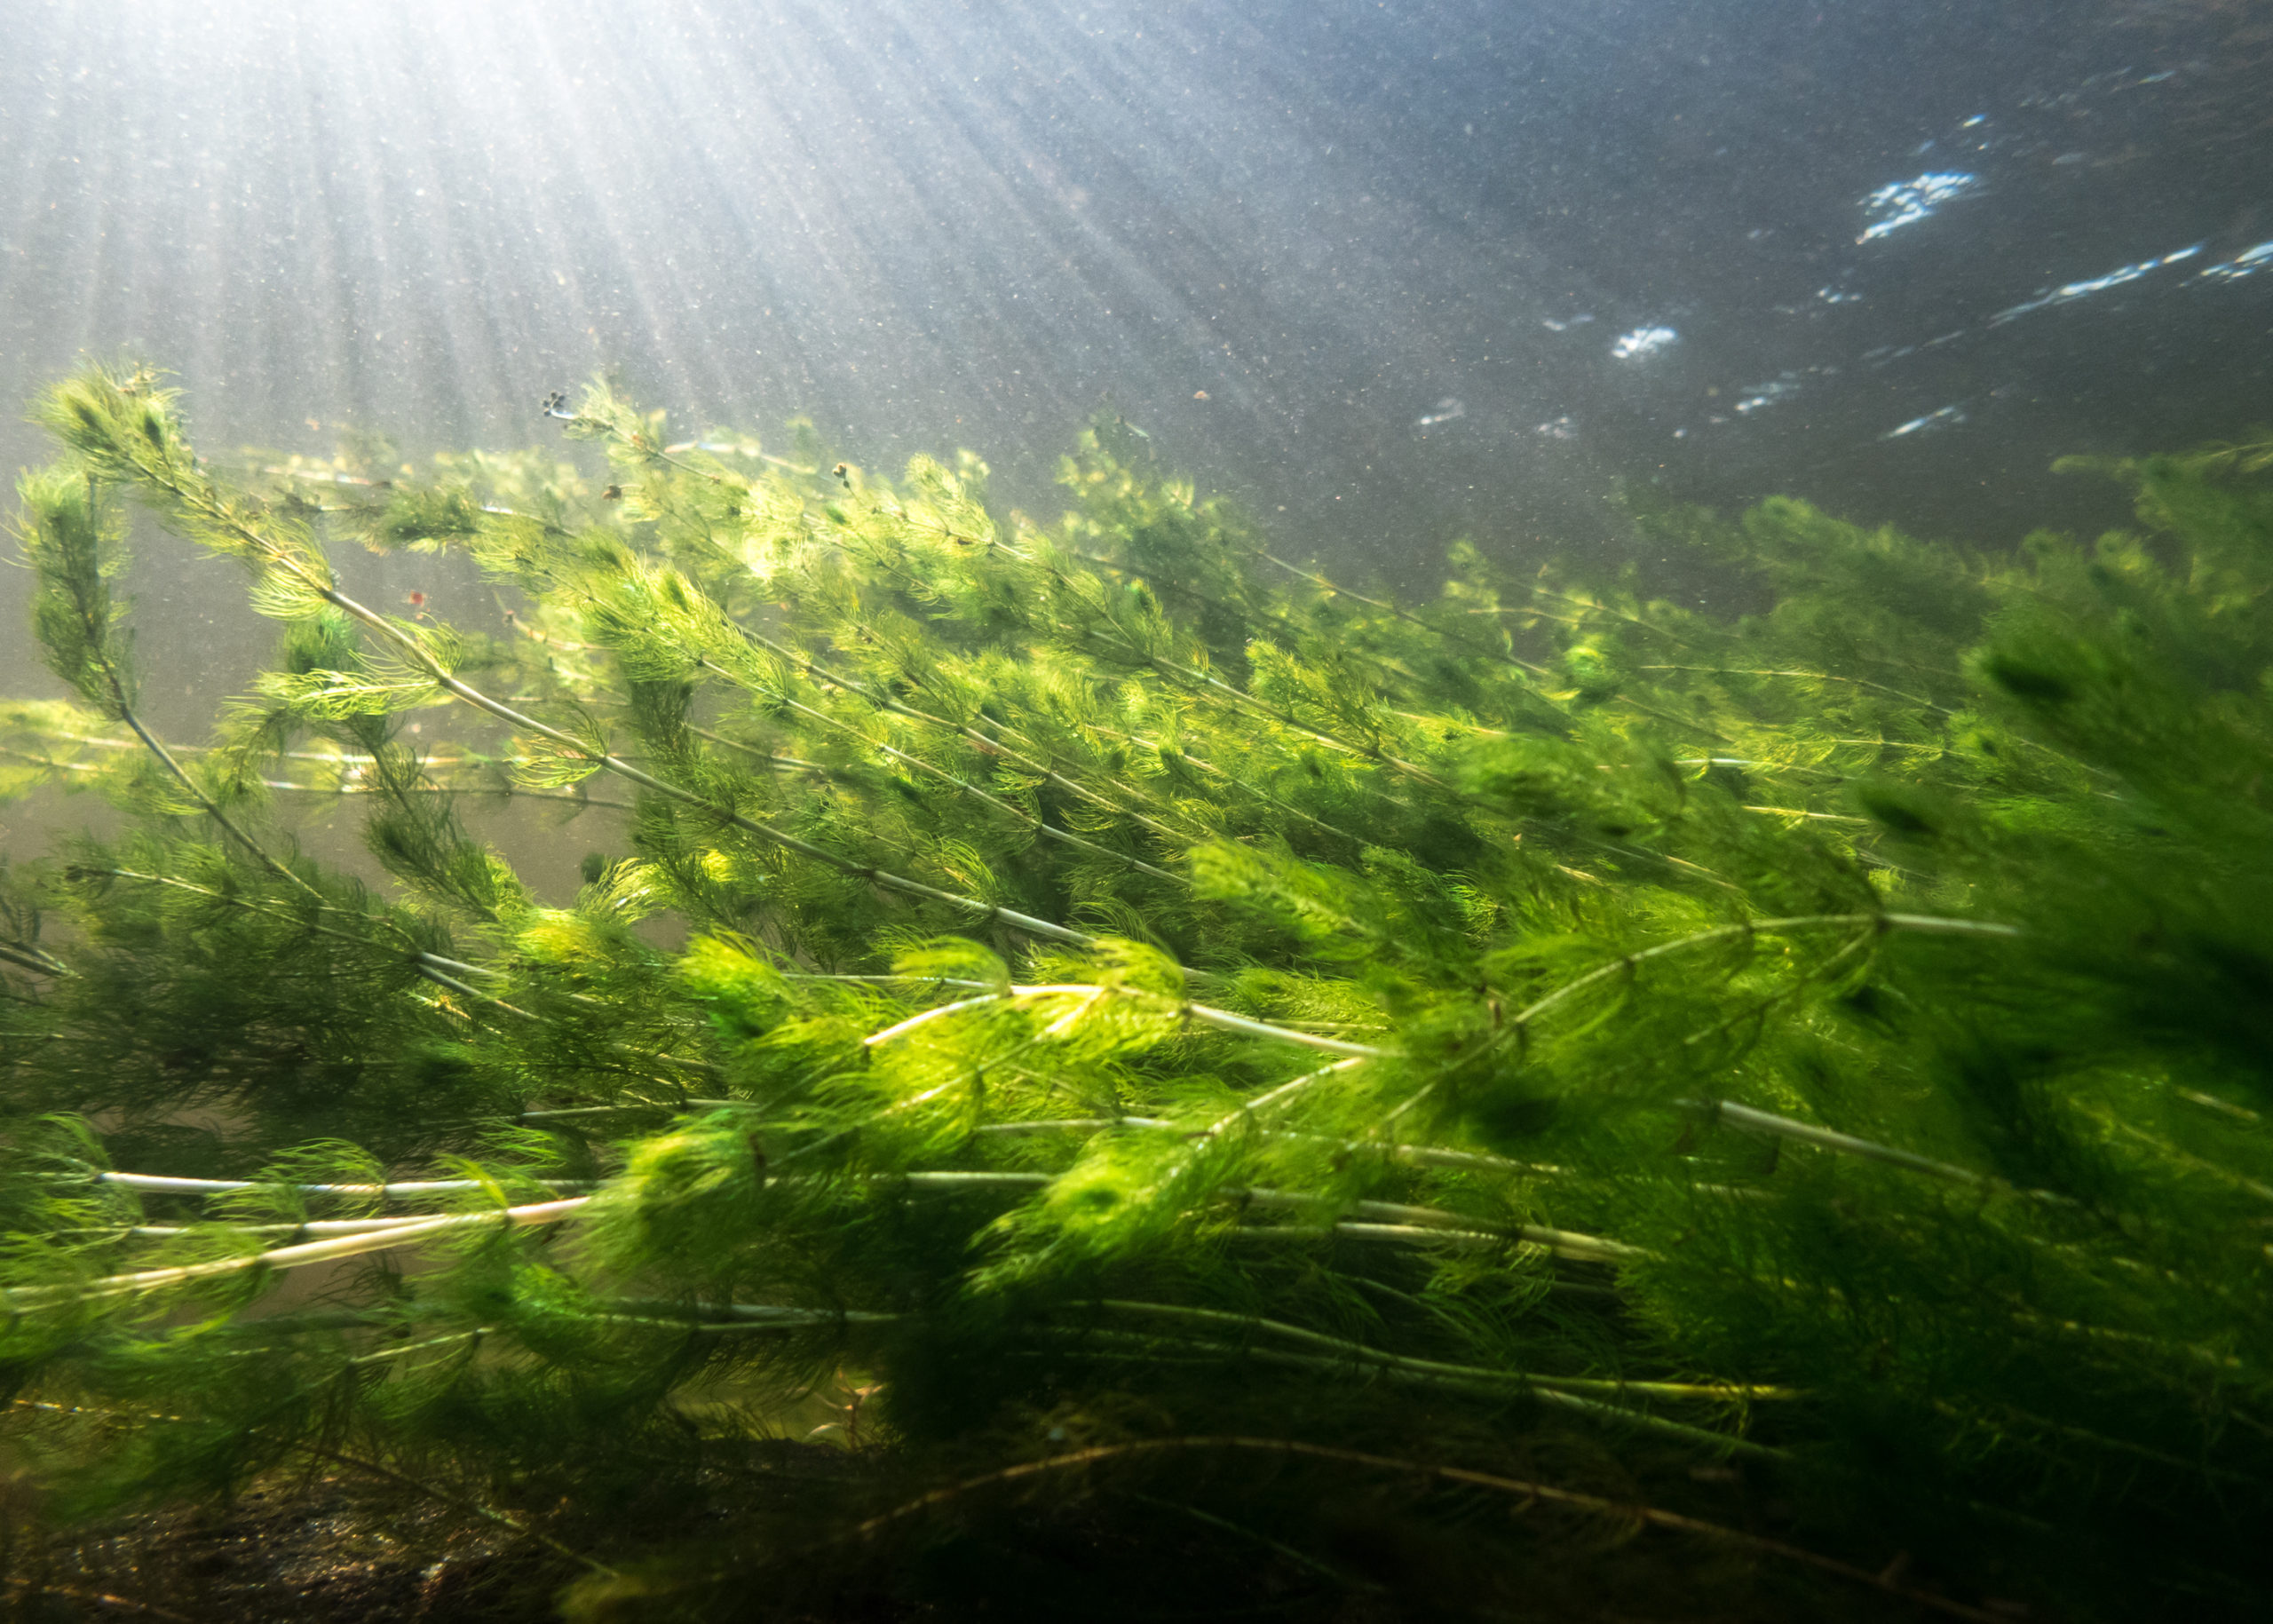 Dense underwater watermilfoil vegetation swaying in clear-watered river in Finland with sunrays above.